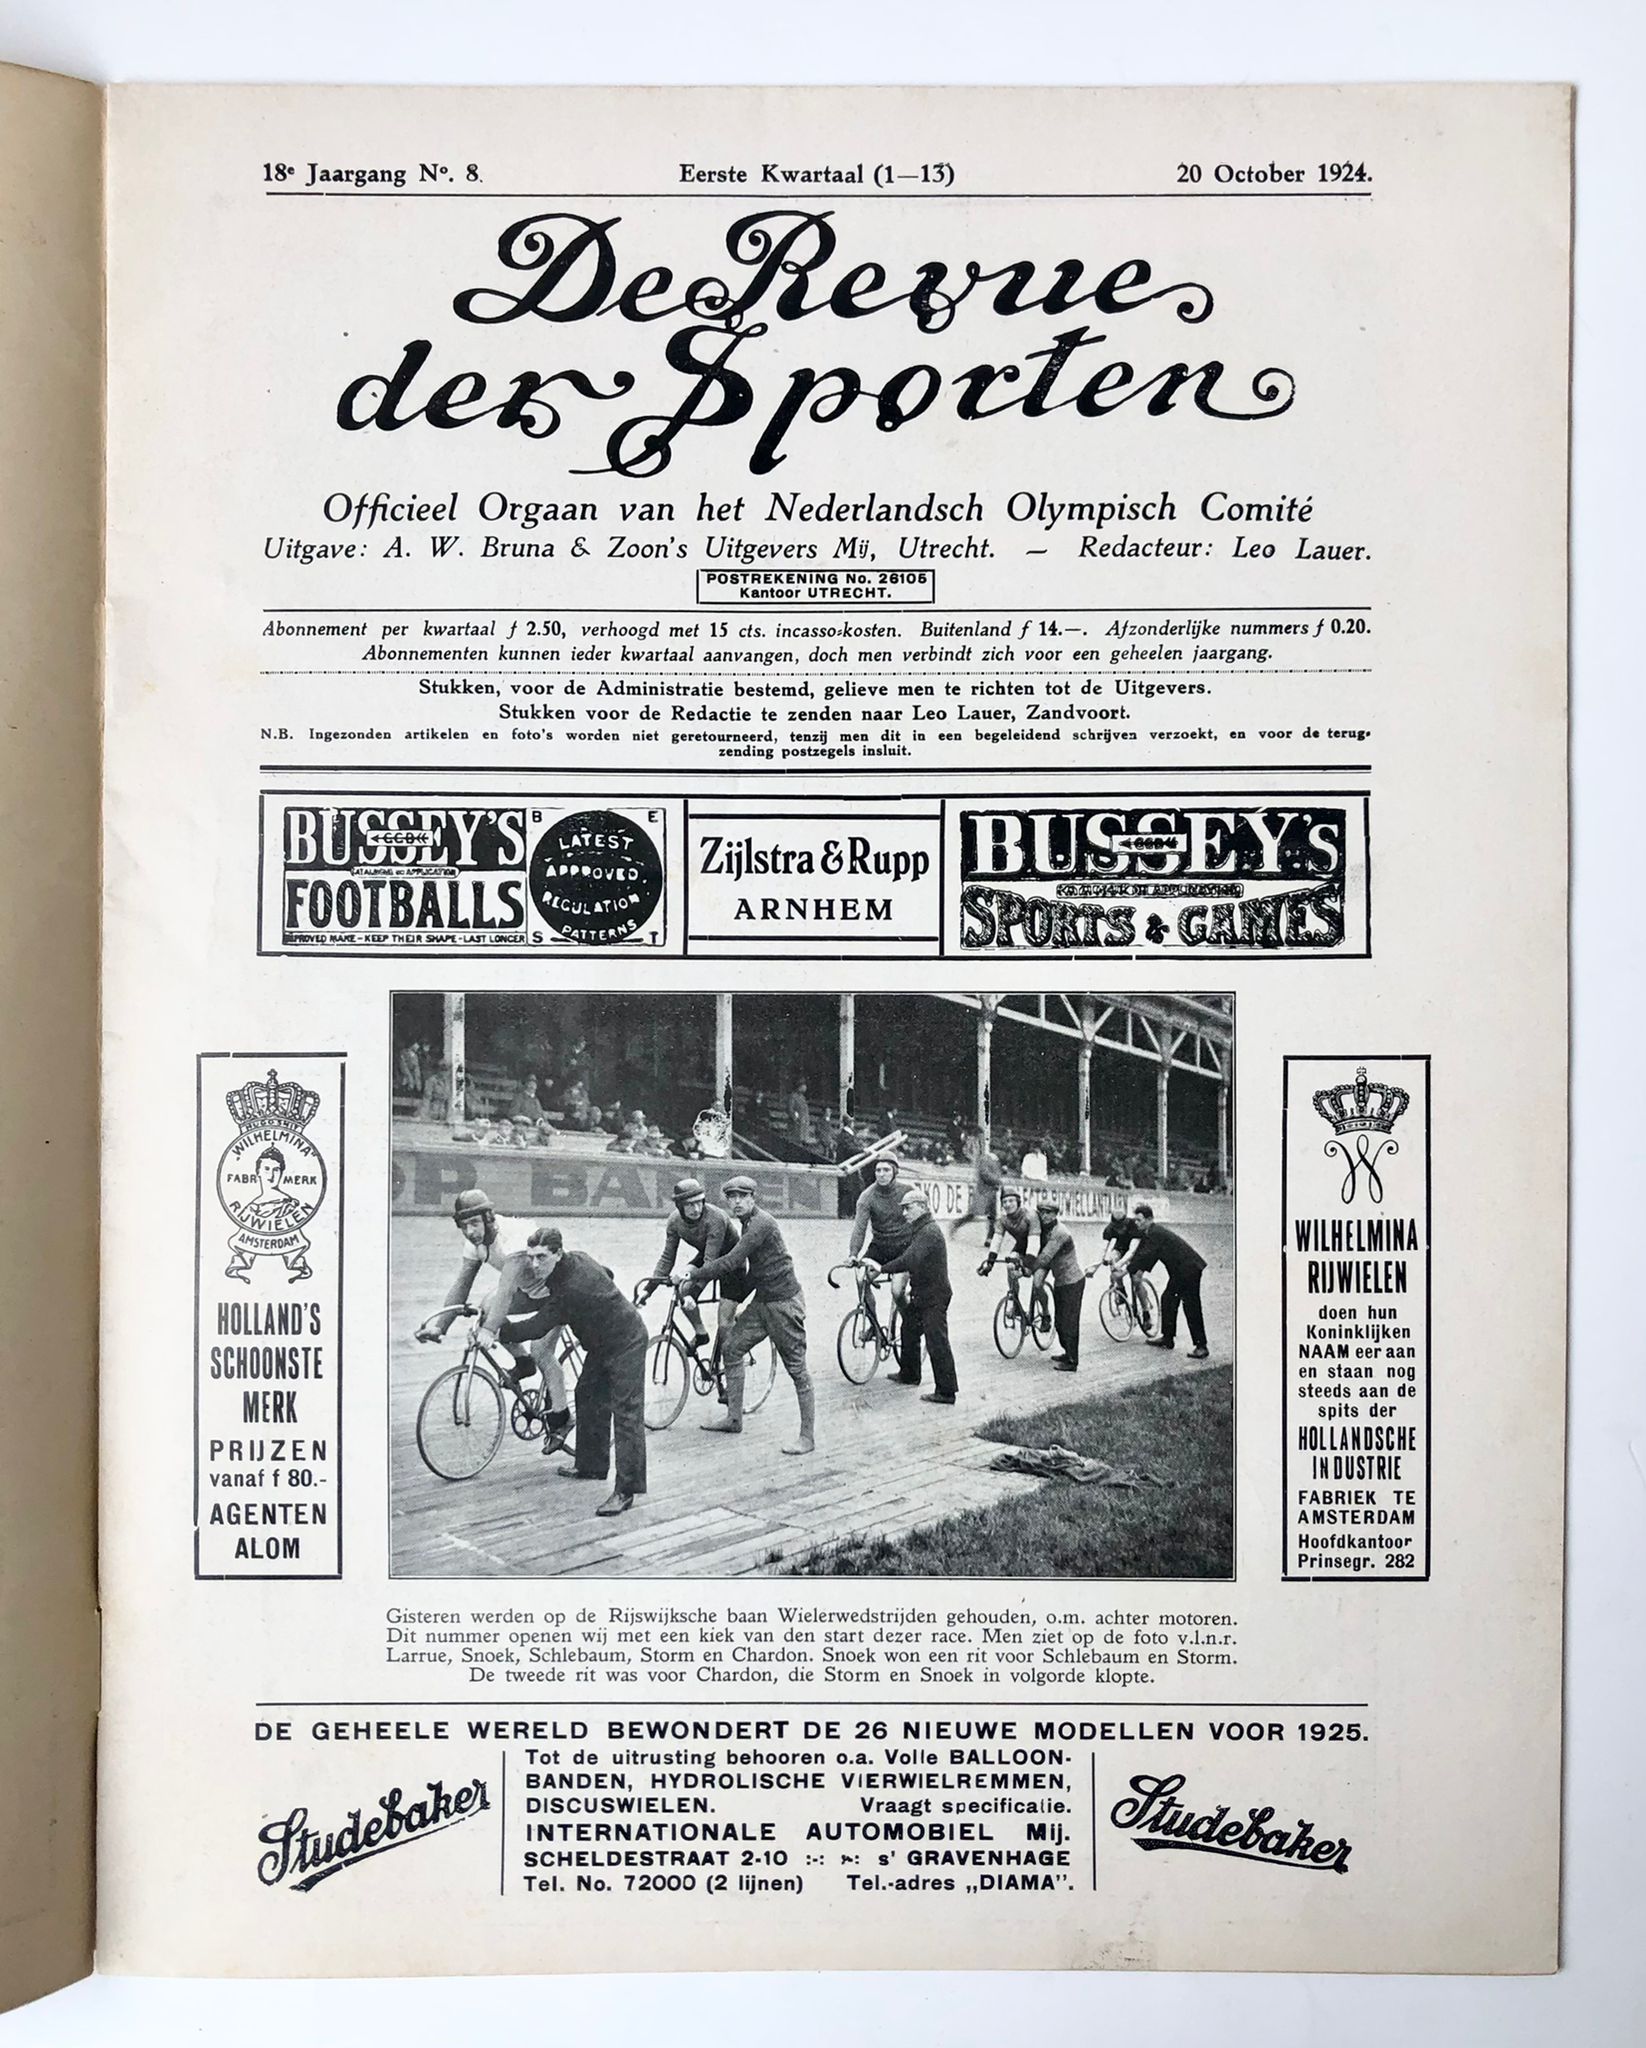 [Sport magazines, baseball, voetbal 1925] 15 editions of the Revue der Sporten, with articles on Baseball (Honkbal), 1924-1925, illustrated.